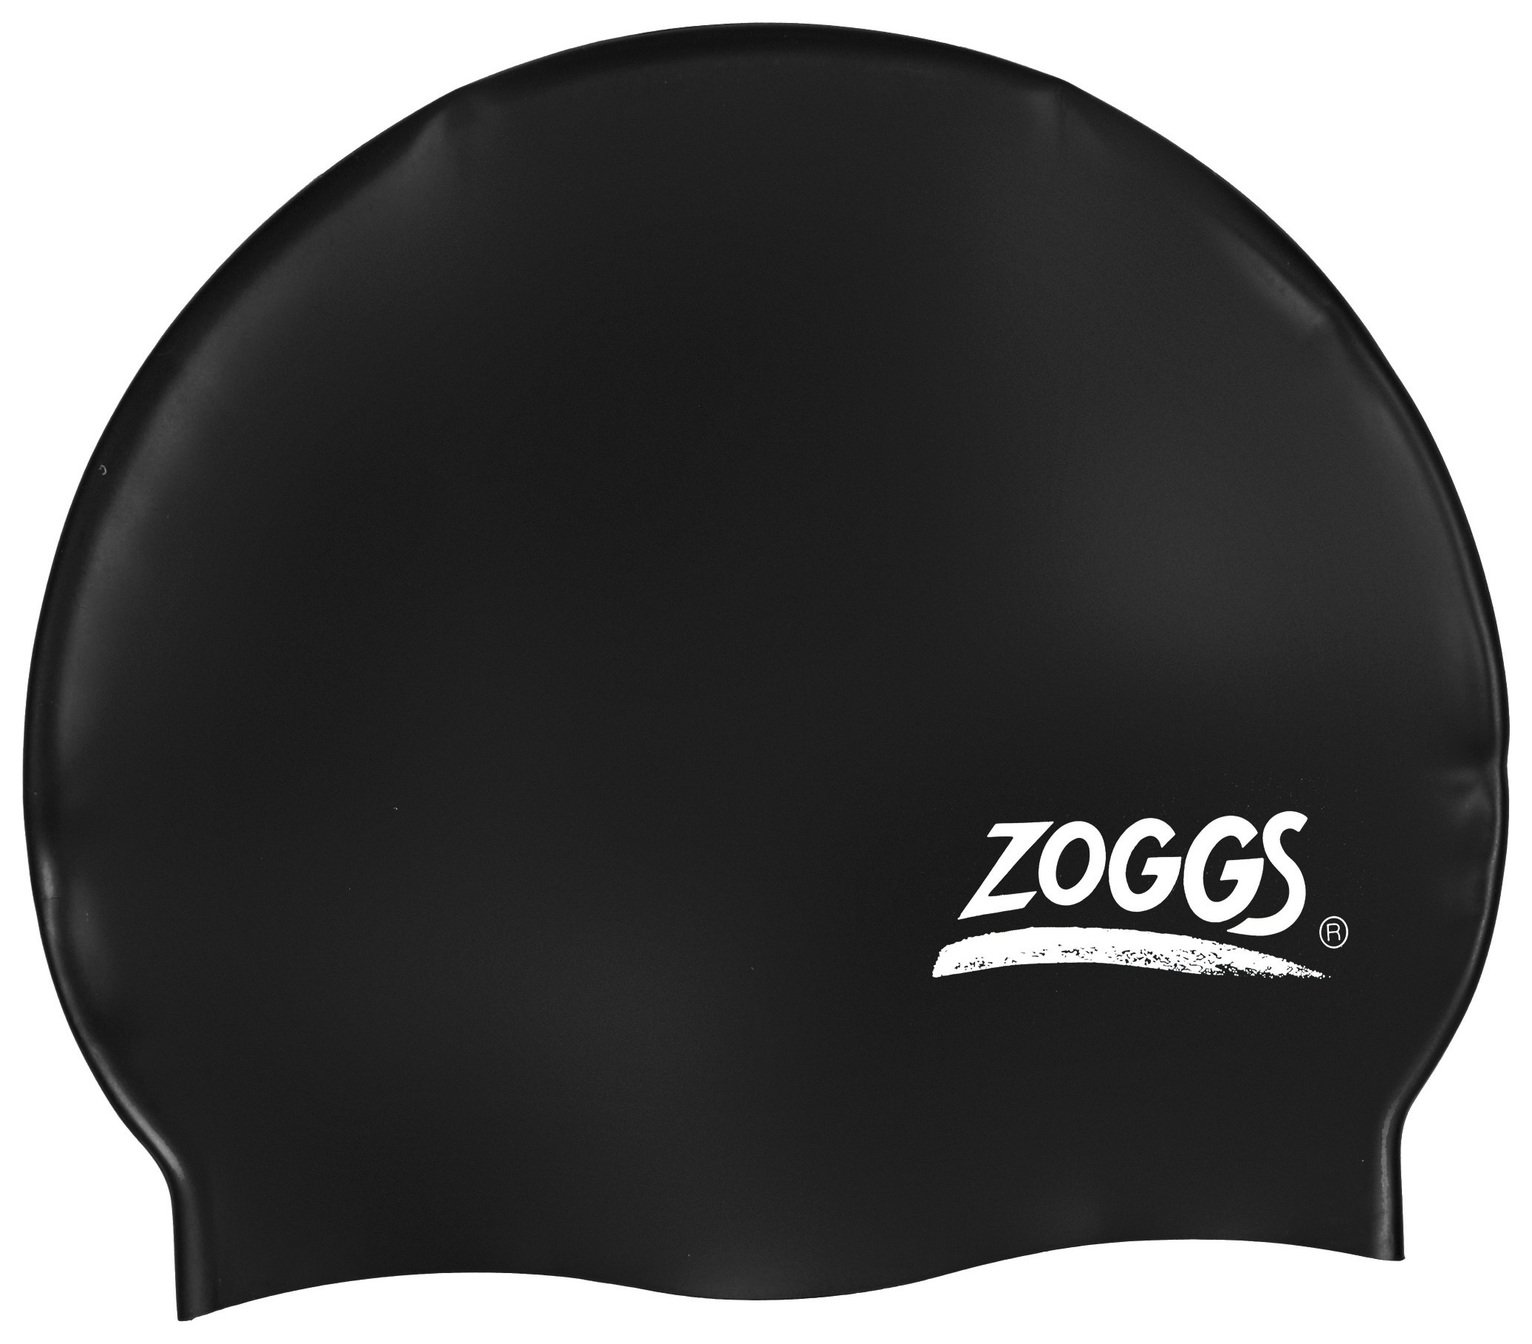 Zoggs Easy Fit Silicone Swimming Cap review